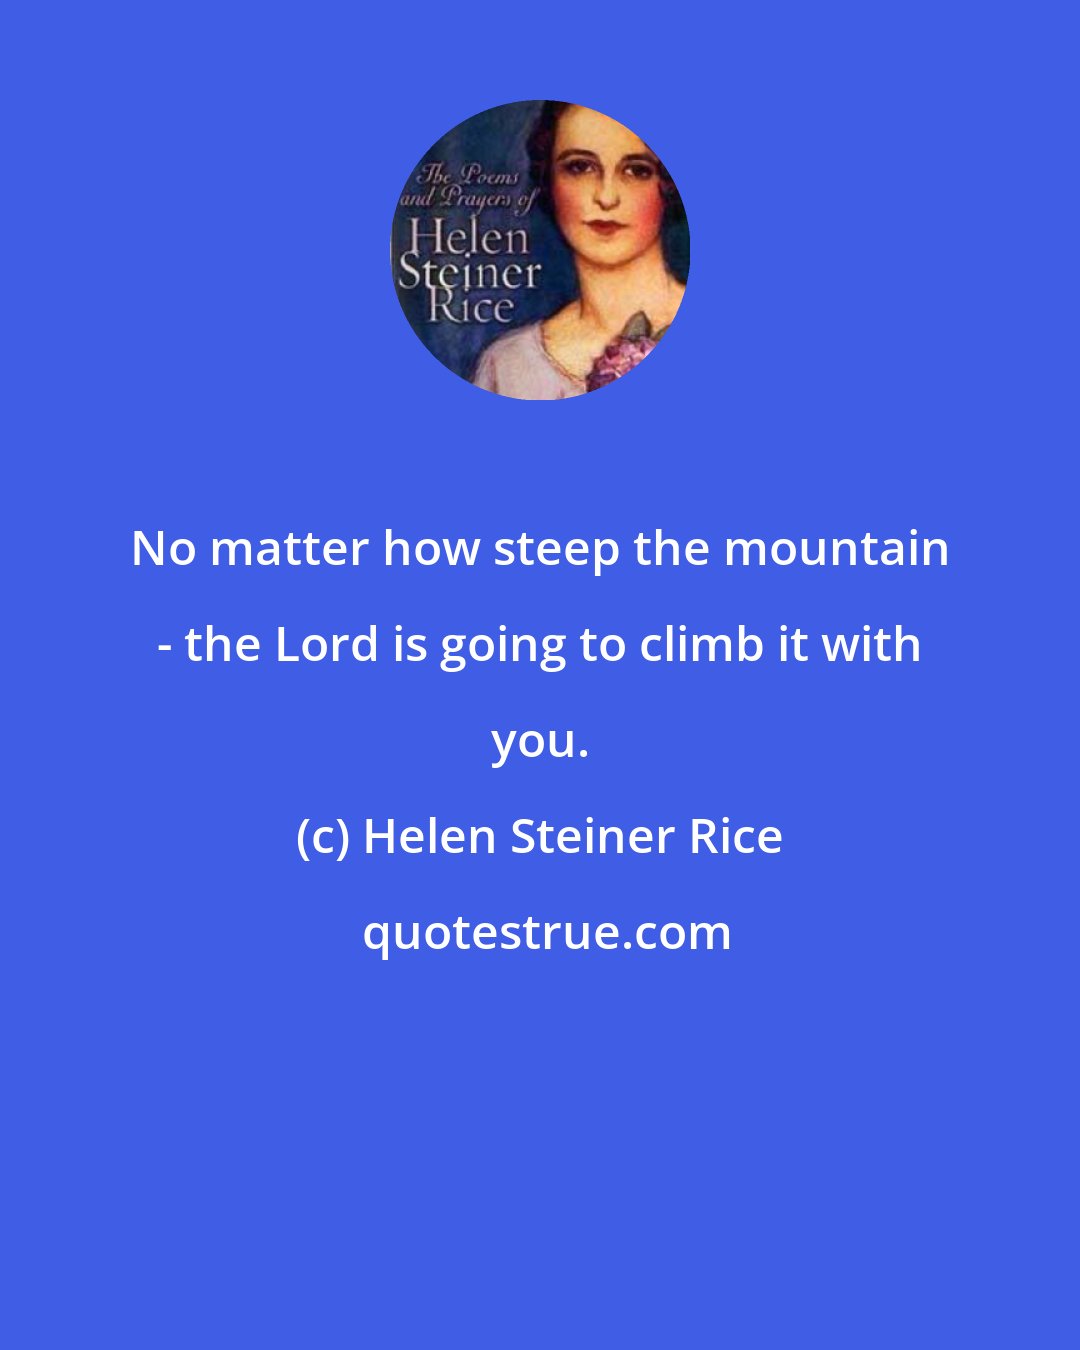 Helen Steiner Rice: No matter how steep the mountain - the Lord is going to climb it with you.